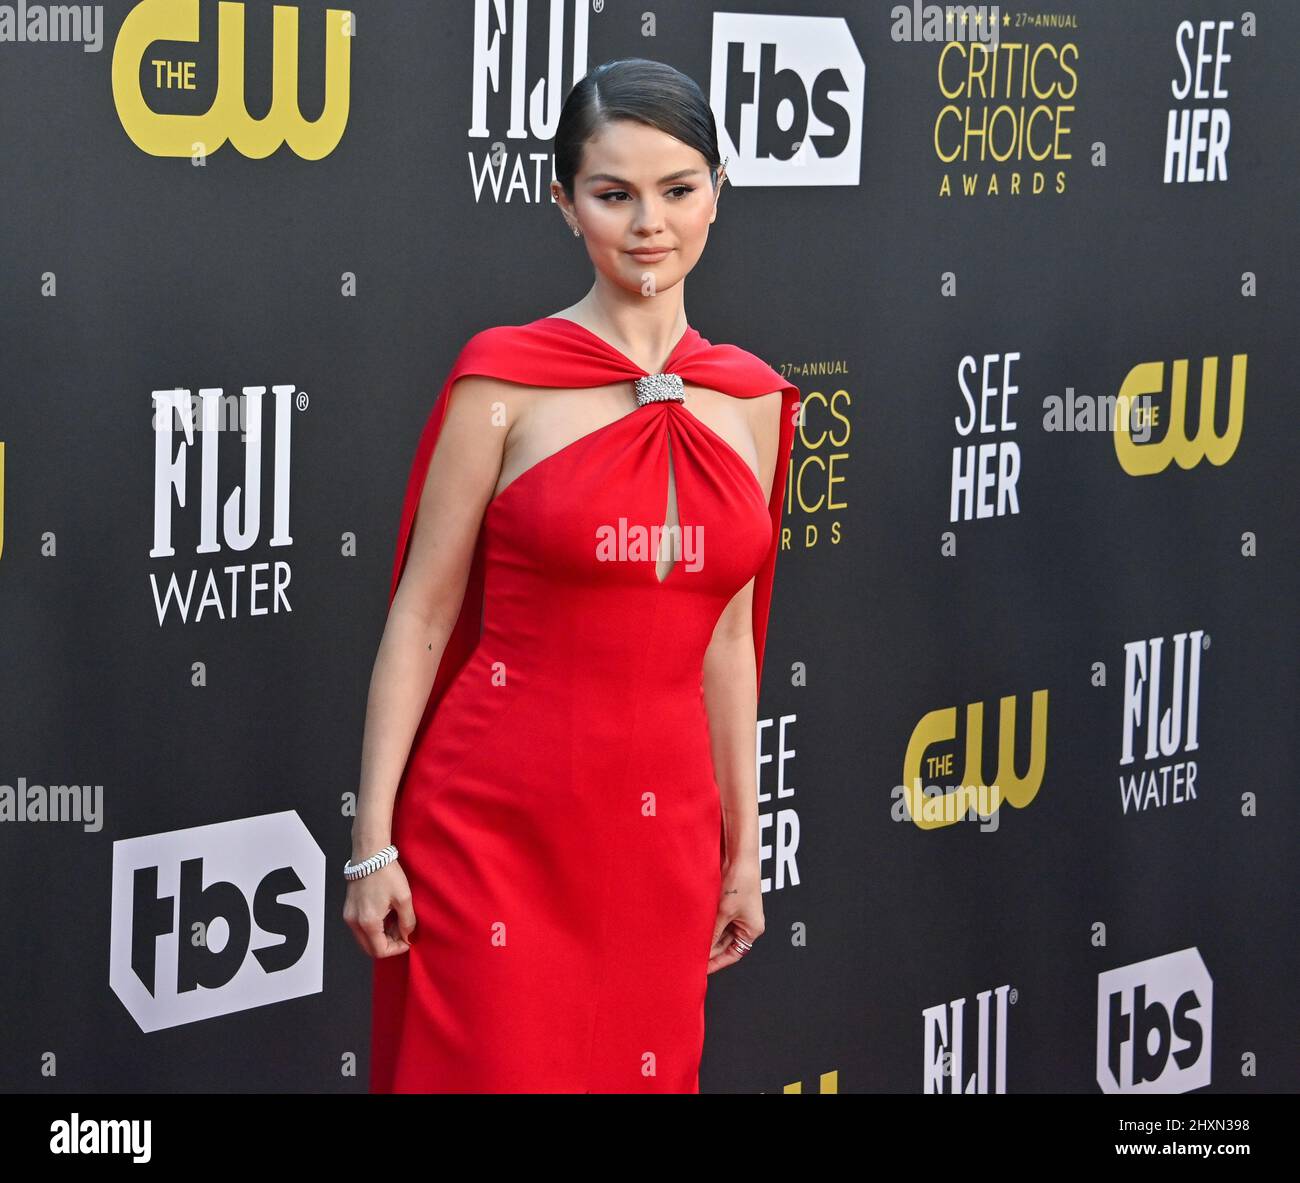 Los Angeles, United States. 13th Mar, 2022. Selena Gomez attends the 27th annual Critics Choice Awards at the Fairmont Century Plaza on Sunday, March 13, 2022. Credit: UPI/Alamy Live News Stock Photo